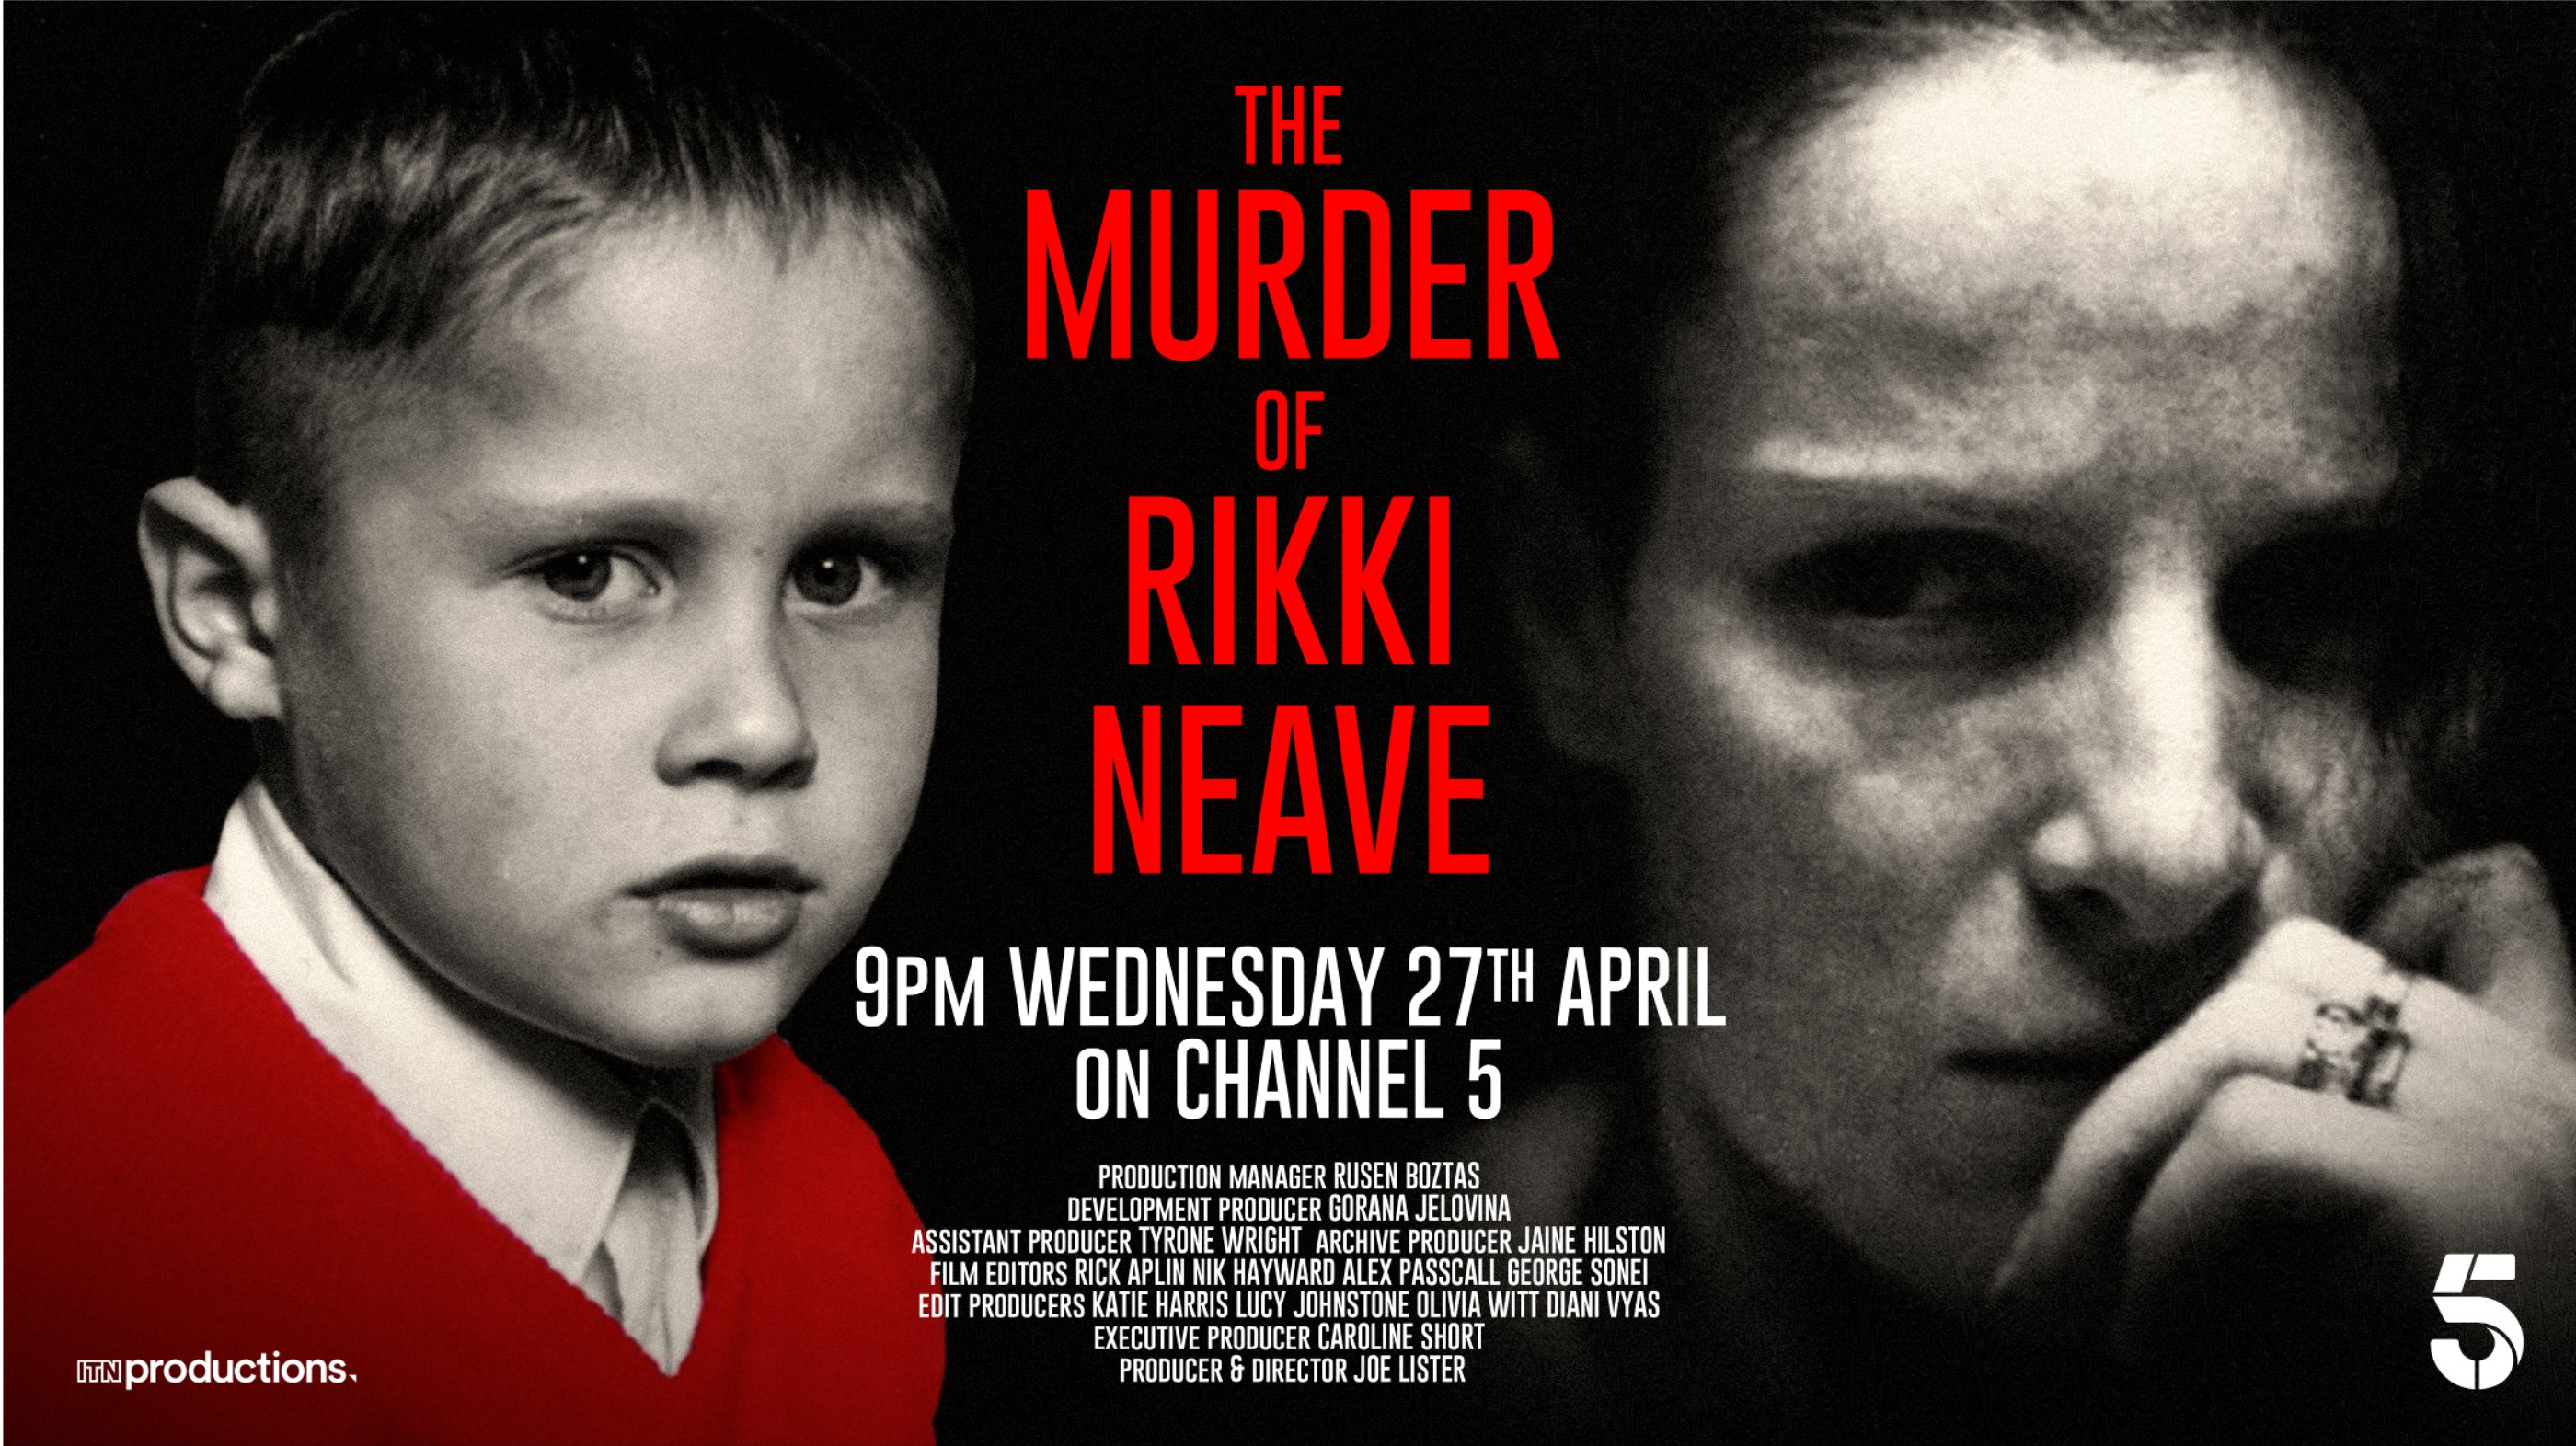 Parm Sandhu @SuptParm on X: The Killer of Rikki Neave finally brought to  justice 30 years on. His mother wrongly accused vindicated This documentary  explores the twists and turns this tragic case